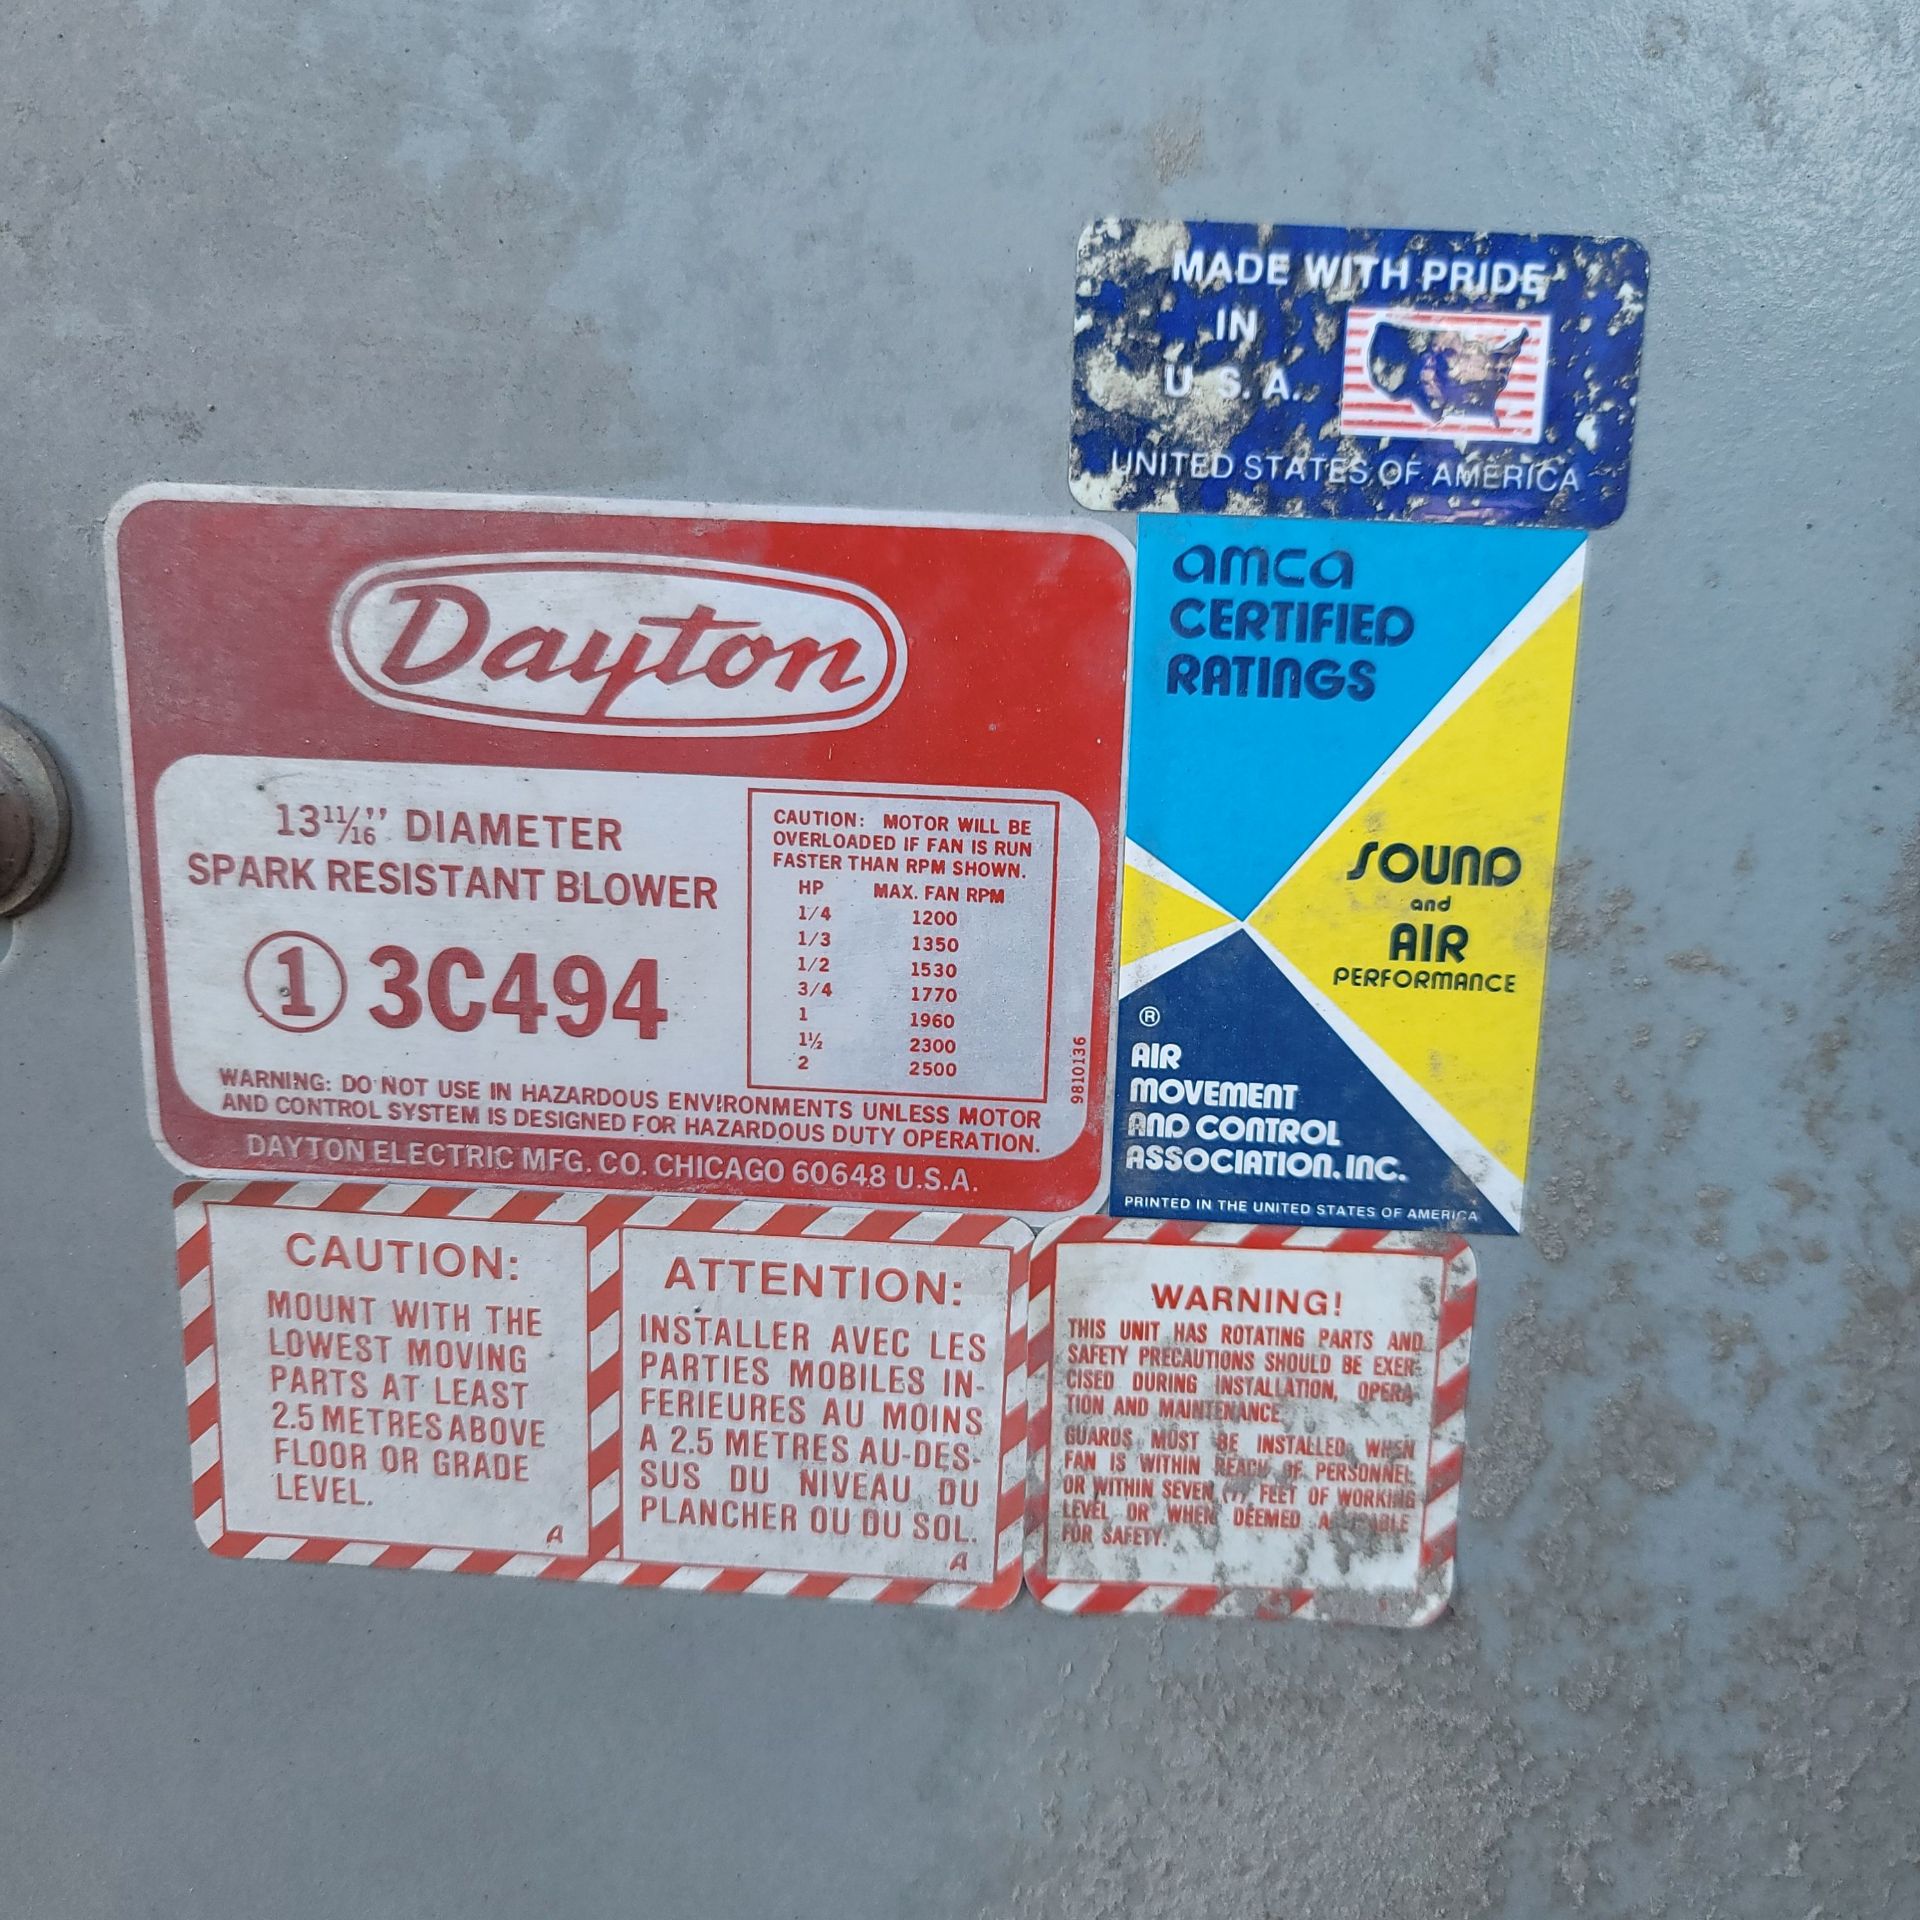 DAYTON 13-11/16" DIA. SPARK RESISTANT BLOWER, NO. 1-30494, HAS NEVER BEEN UNCRATED - Image 3 of 3